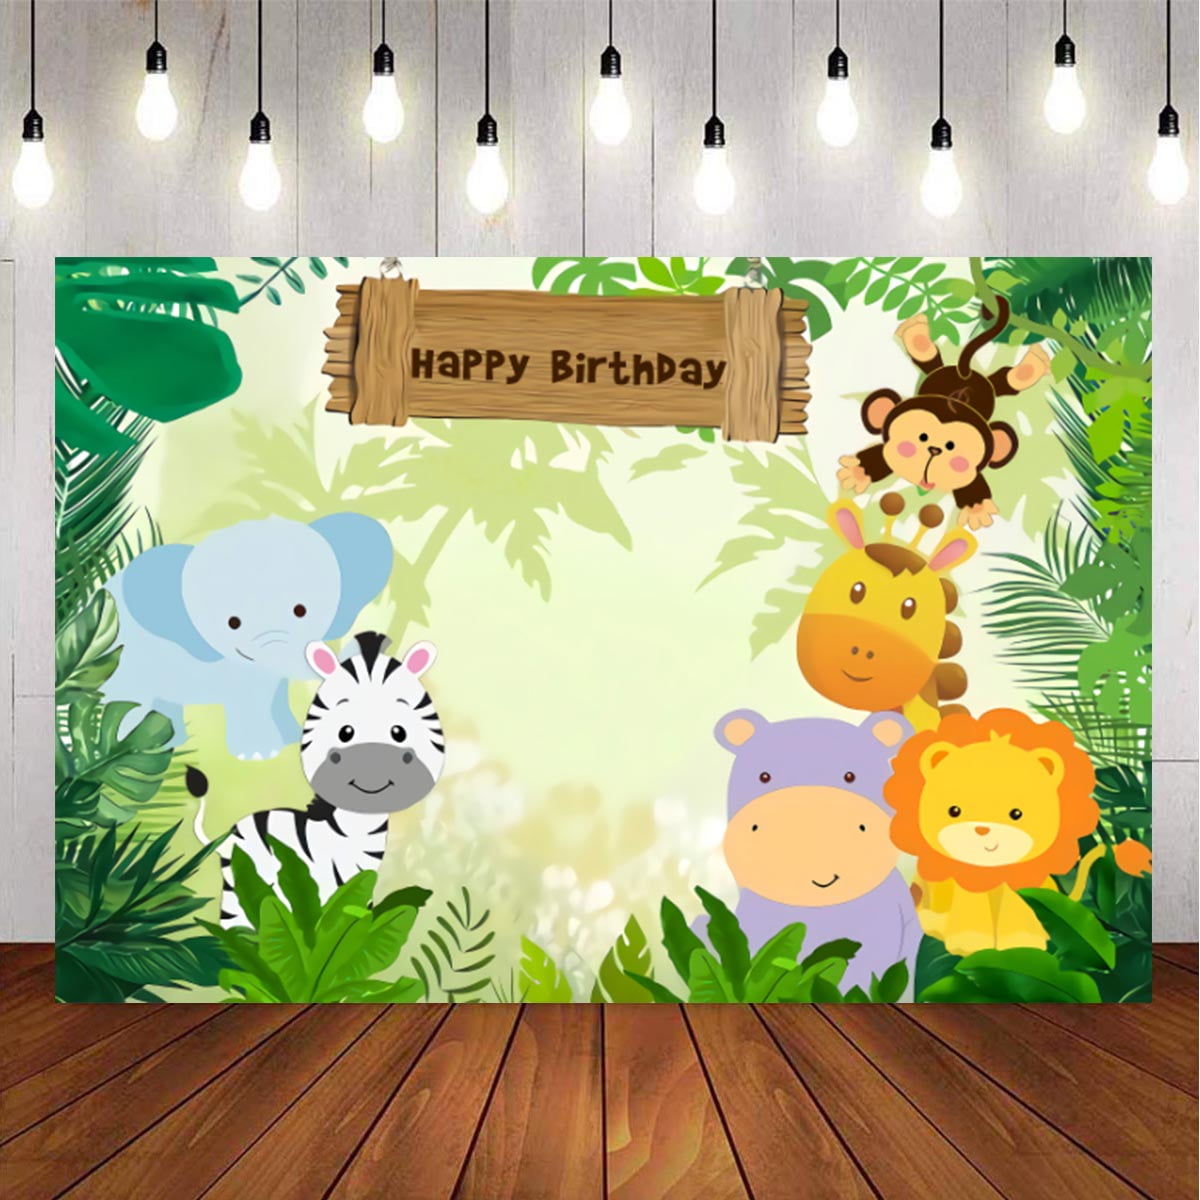 DORCEV 10x8ft Our Little Sunshine Photography Backdrop for Kids 1st Birthday Party Background Stripes Cartoon Sun Colorful Little Flag Kids Birthday Party Cake Table Banner Kida Photo Studio Props